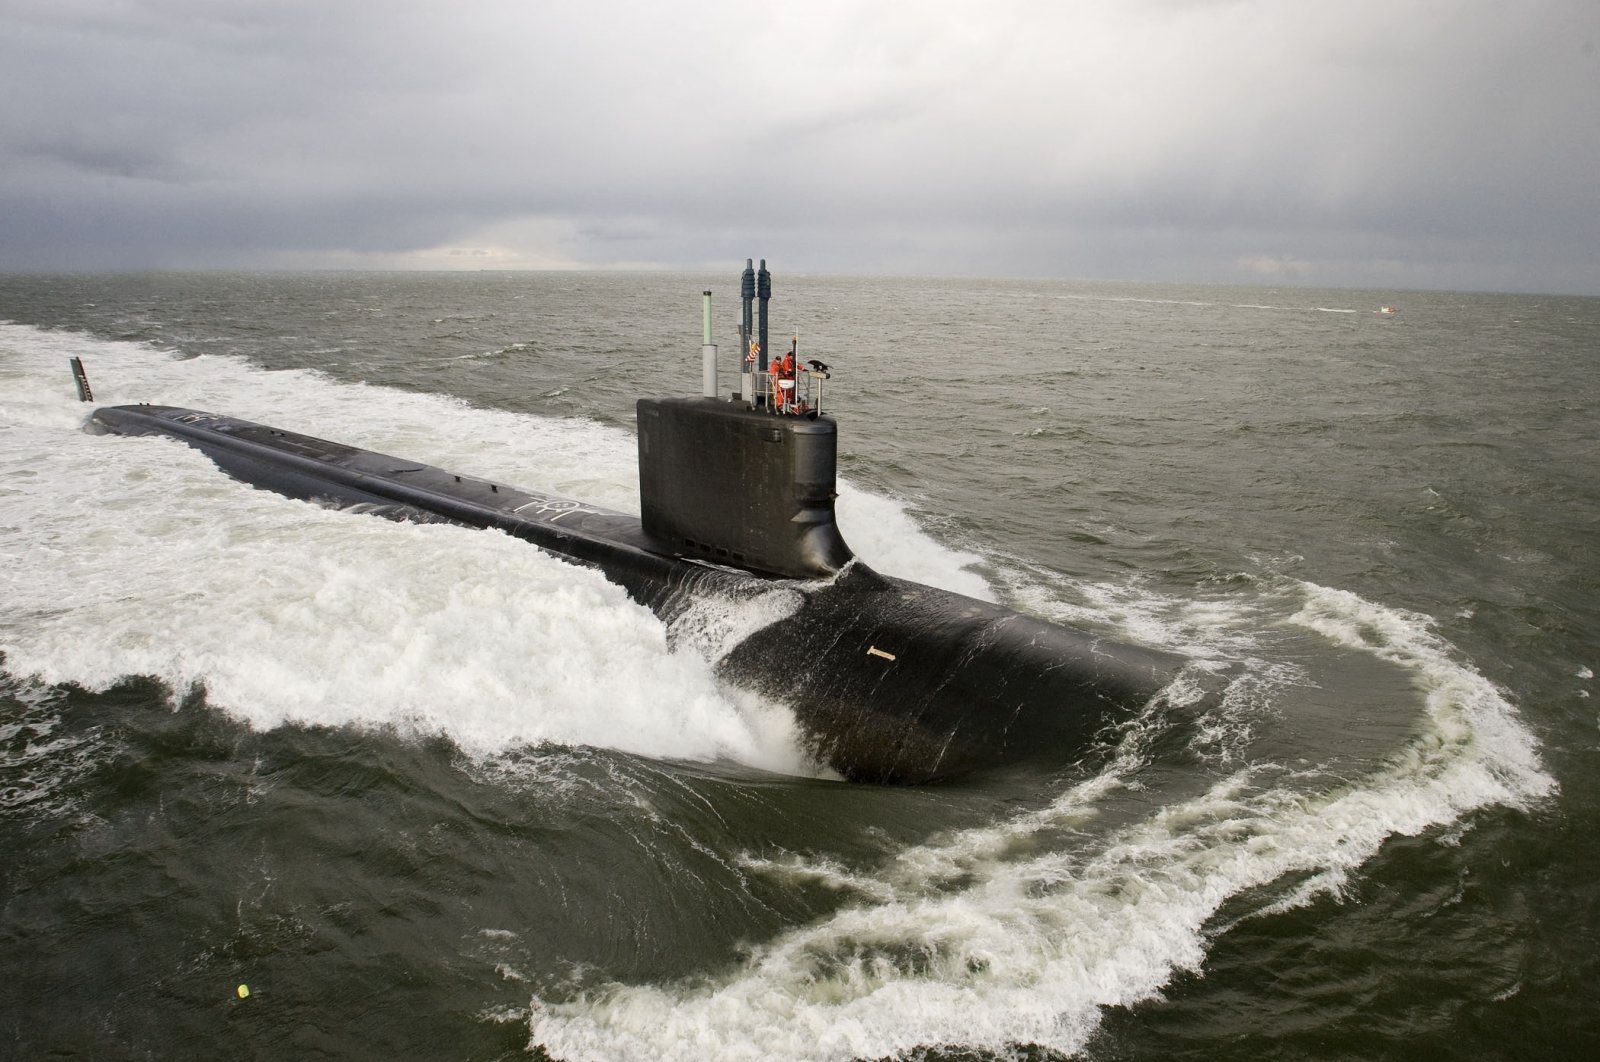 In this file photo taken on Nov. 26, 2009, the Virginia-class attack submarine Pre-Commissioning Unit New Mexico (SSN 779) undergoes Bravo sea trials in the Atlantic Ocean. (U.S. Navy Handout Photo via AFP)